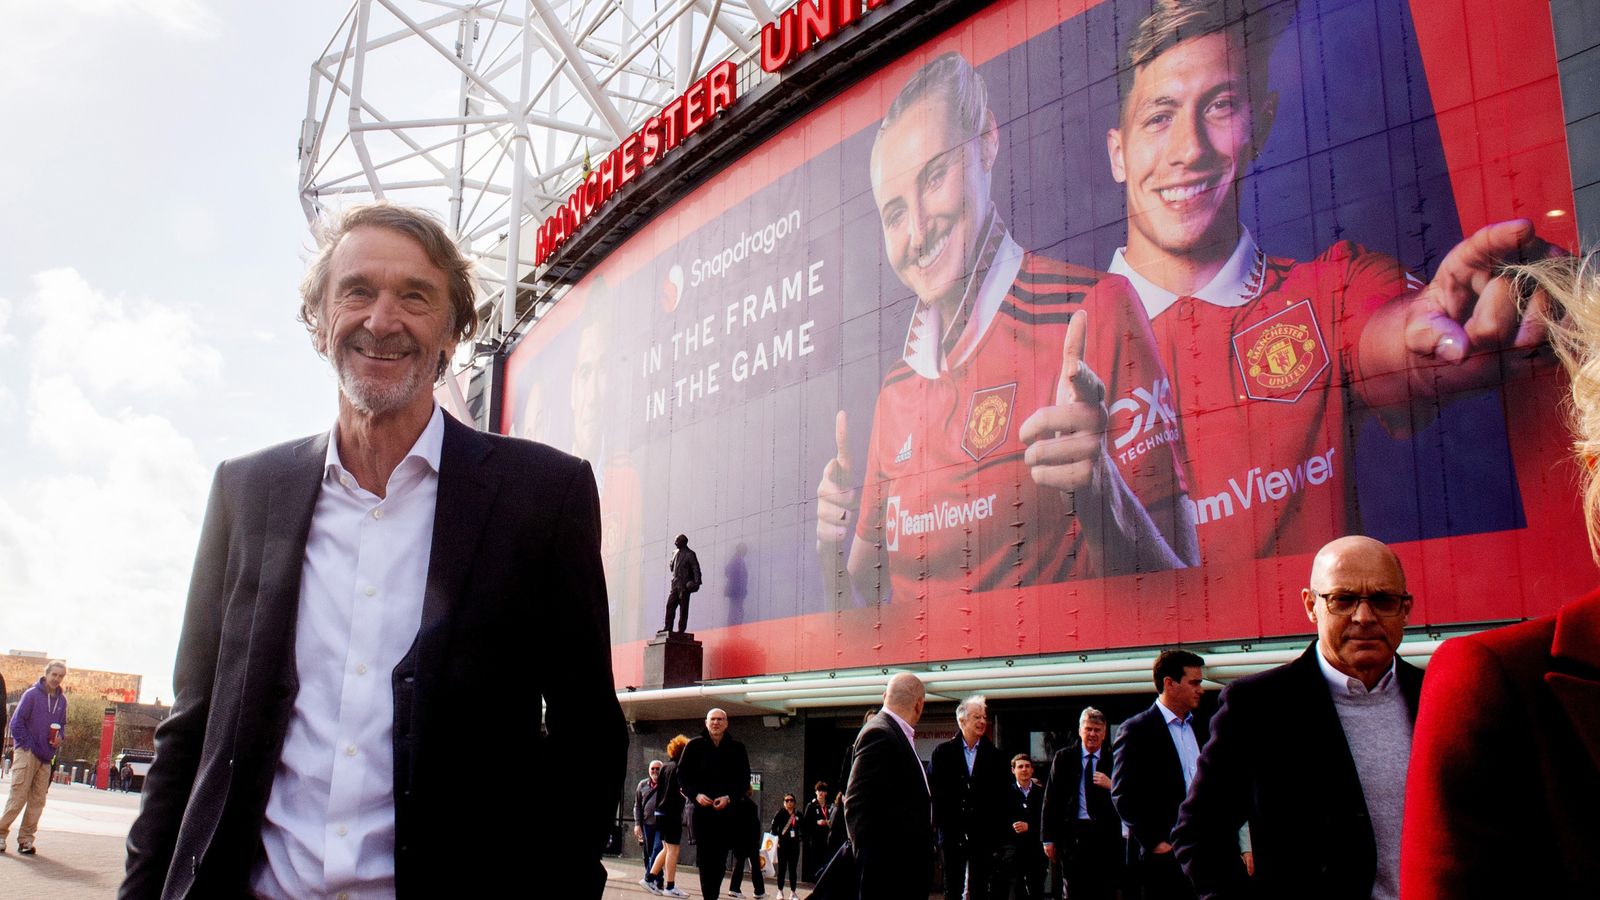 Manchester United to confirm sale of 25% stake to Sir Jim Ratcliffe 